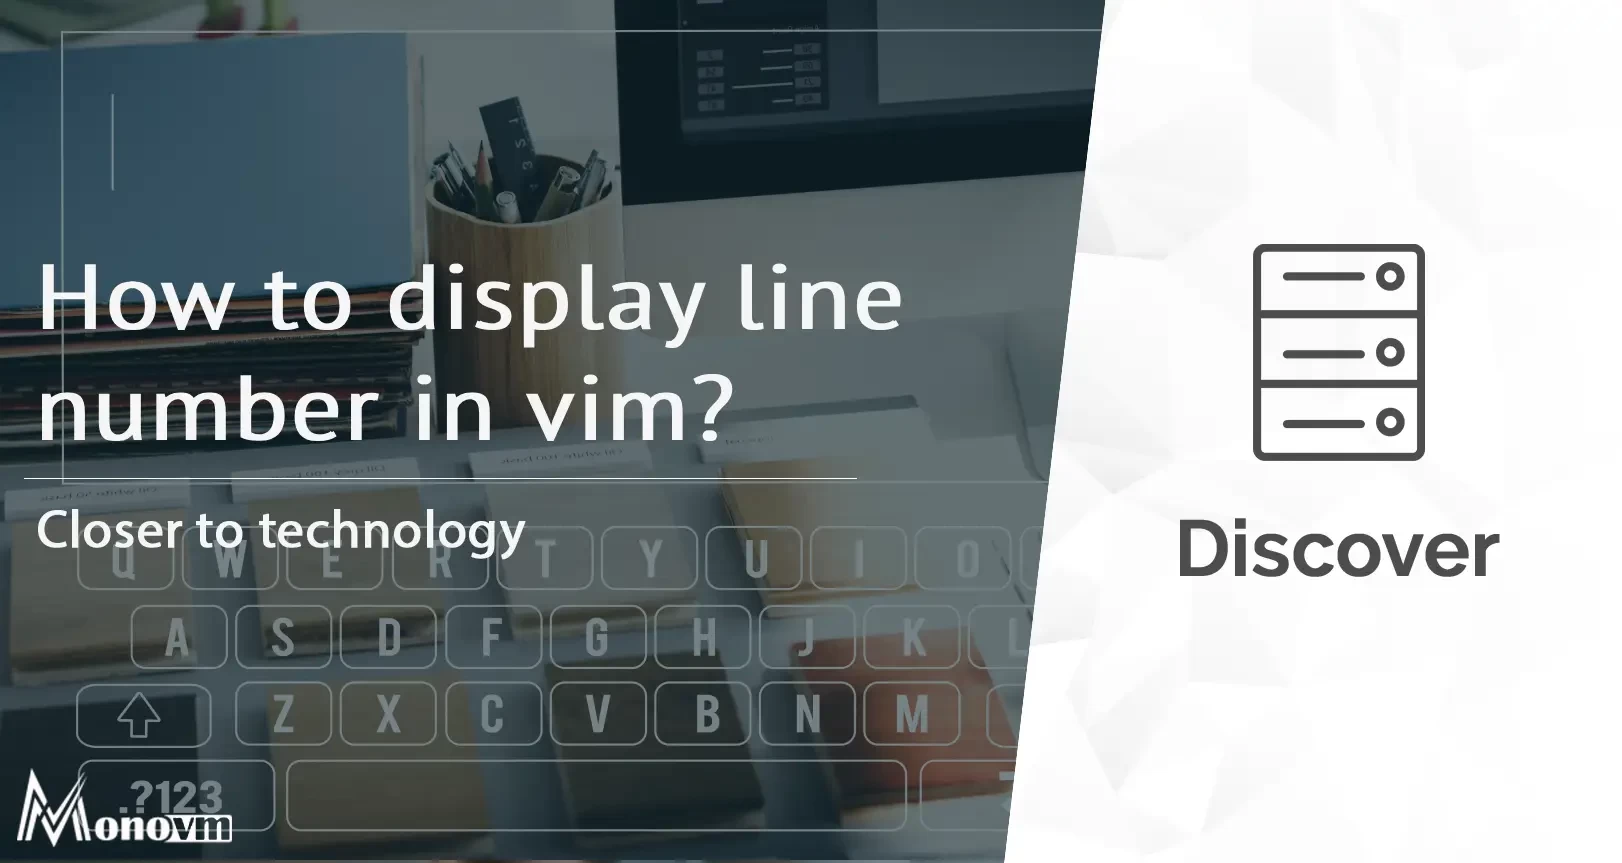 How to display line number in vim?